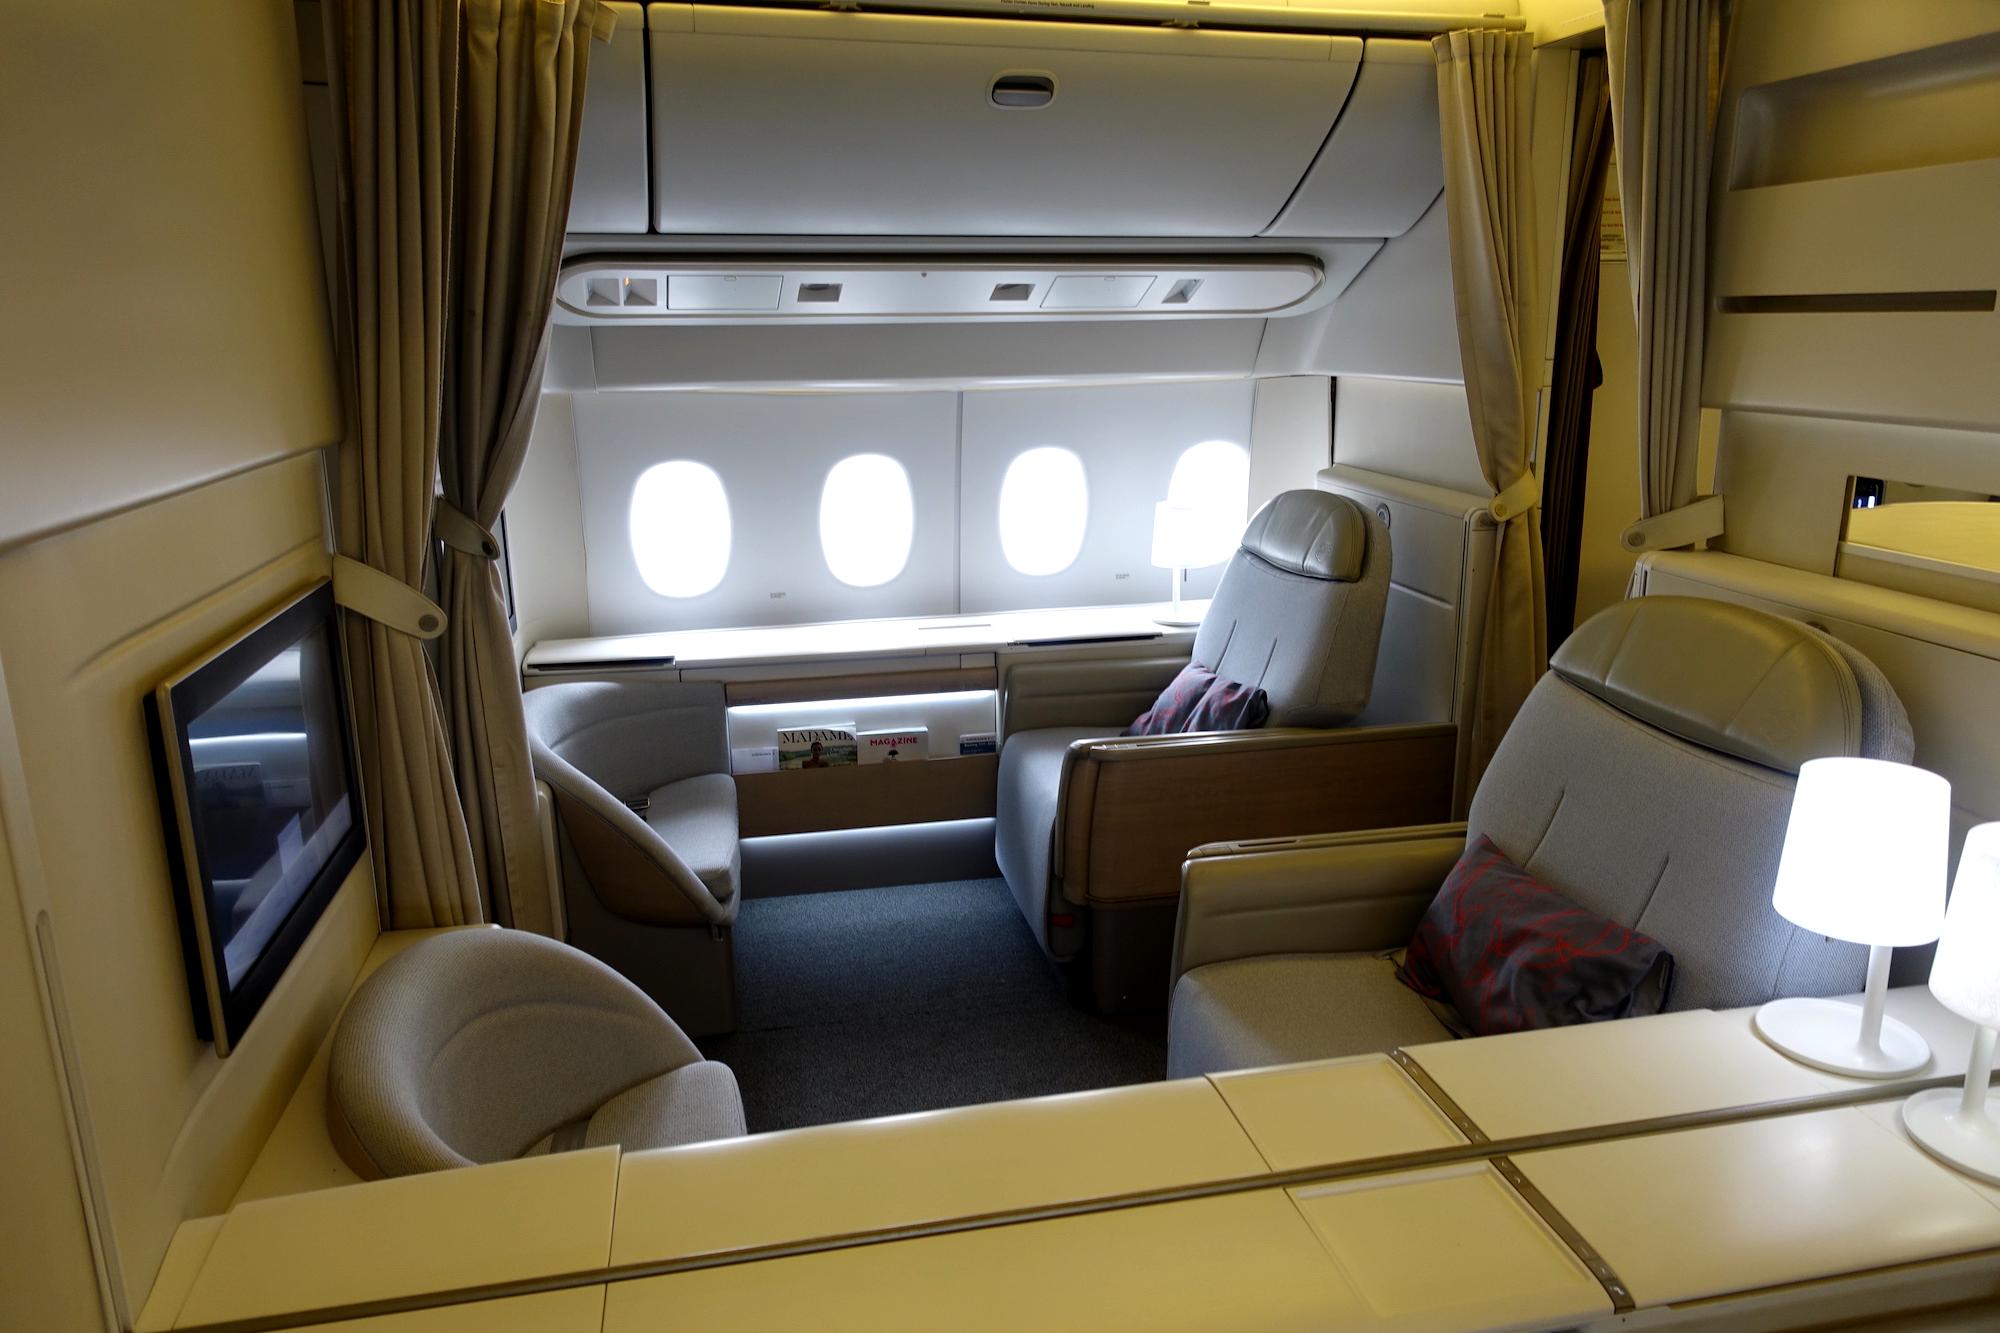 Book Flights with a World-class Airline